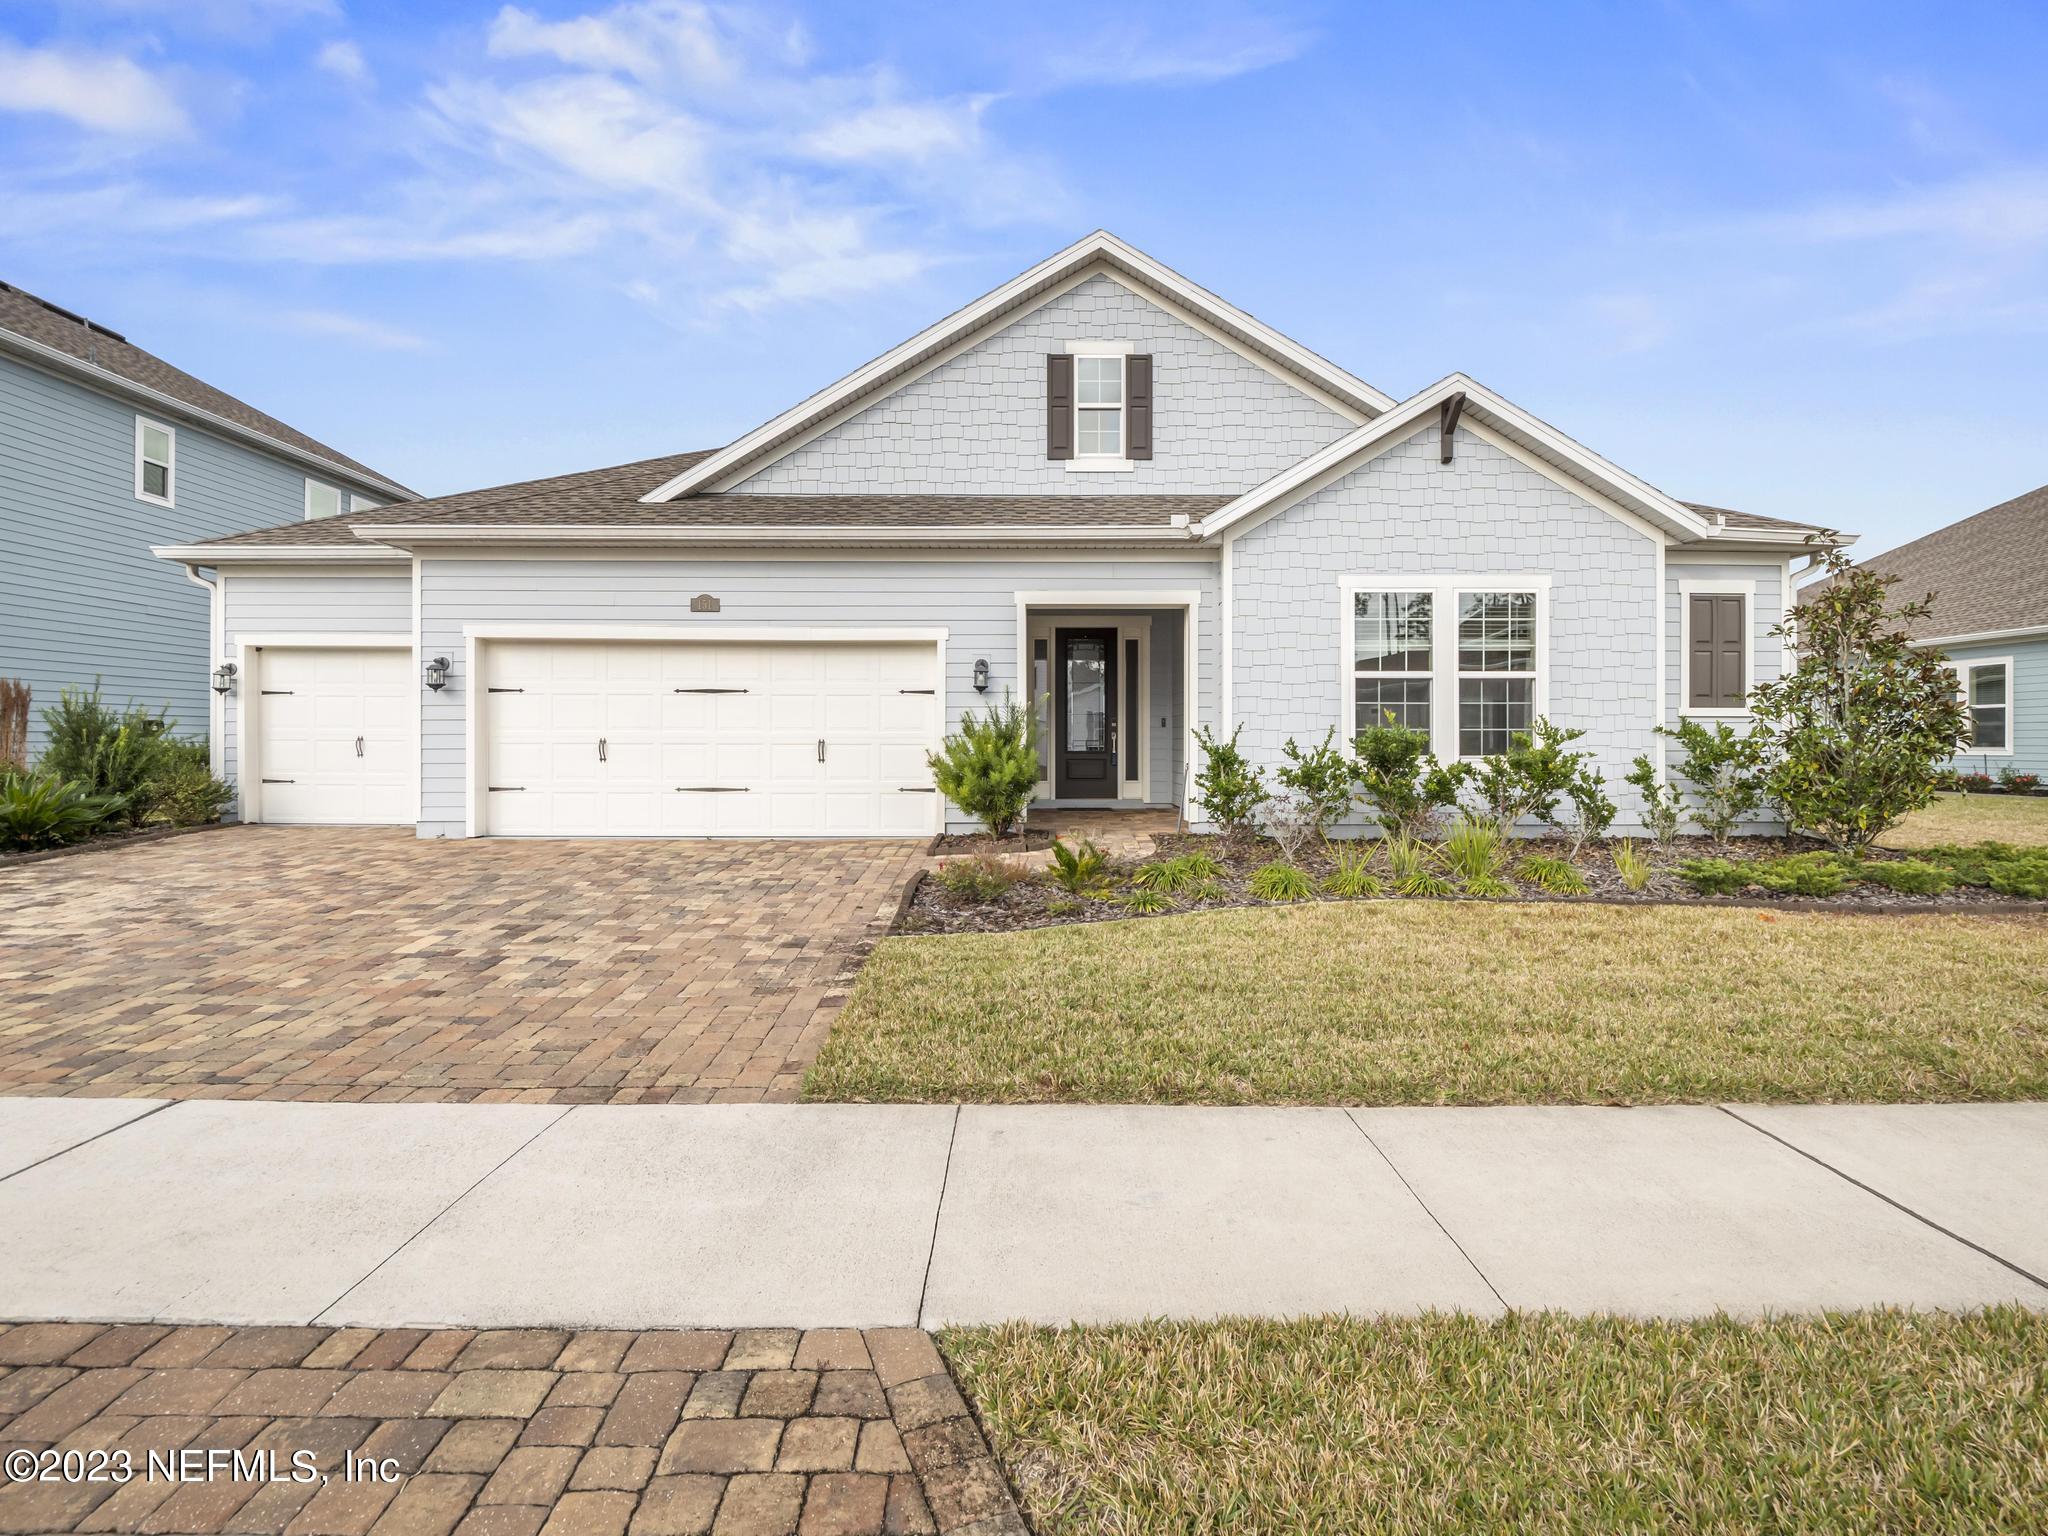 St Johns, FL home for sale located at 151 CALLIEL Way, St Johns, FL 32259